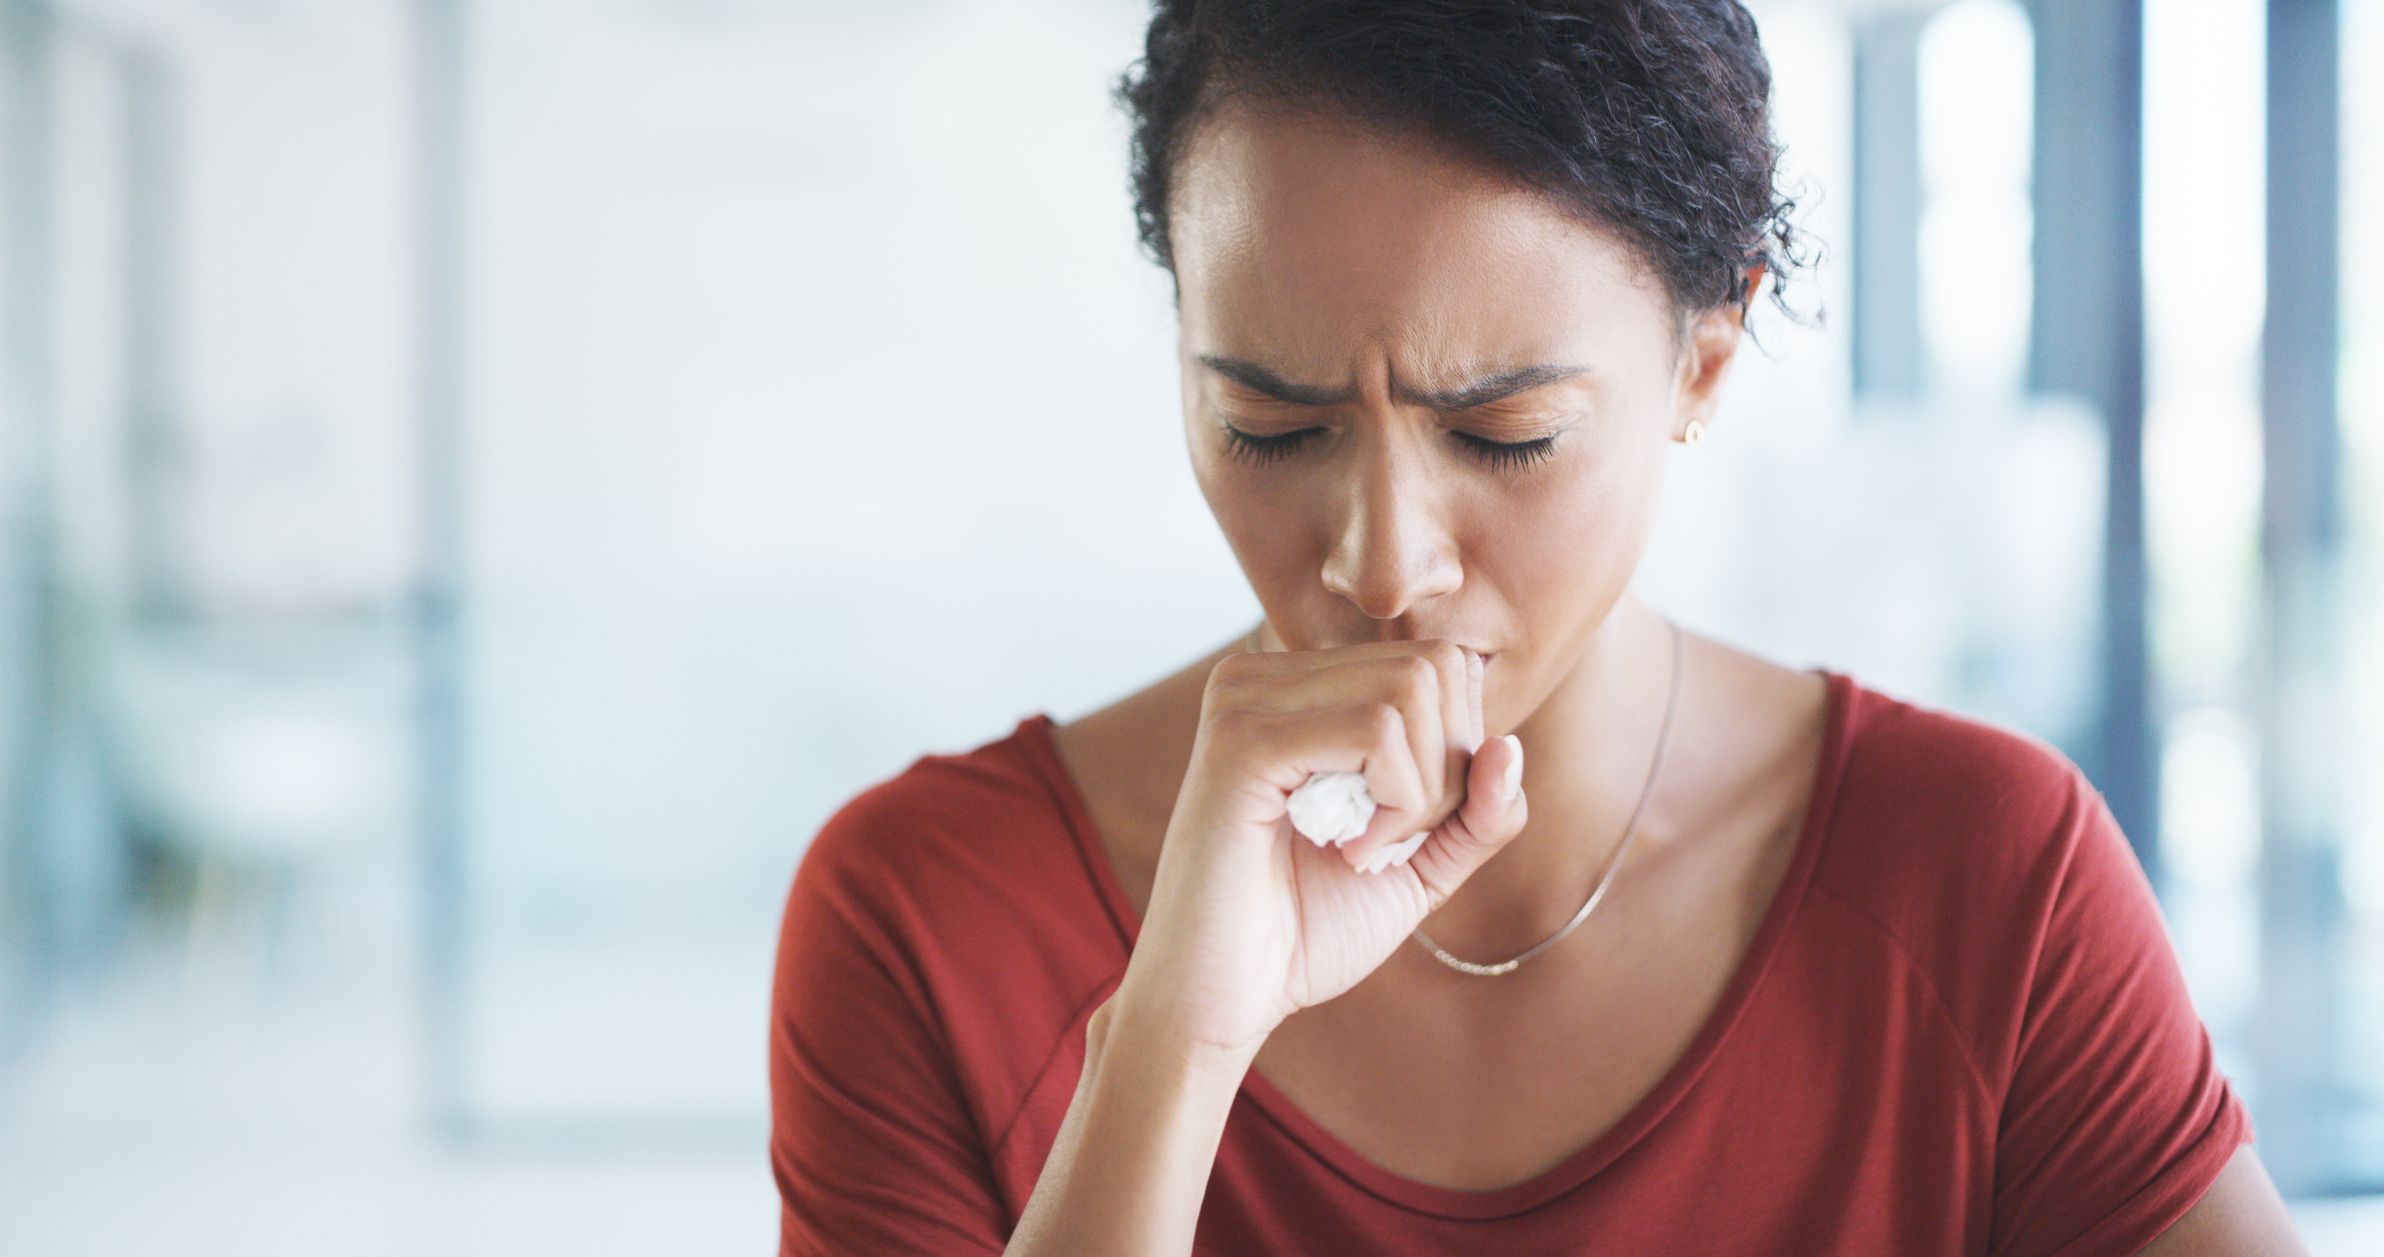 4 Reasons You May Be Coughing All the Time